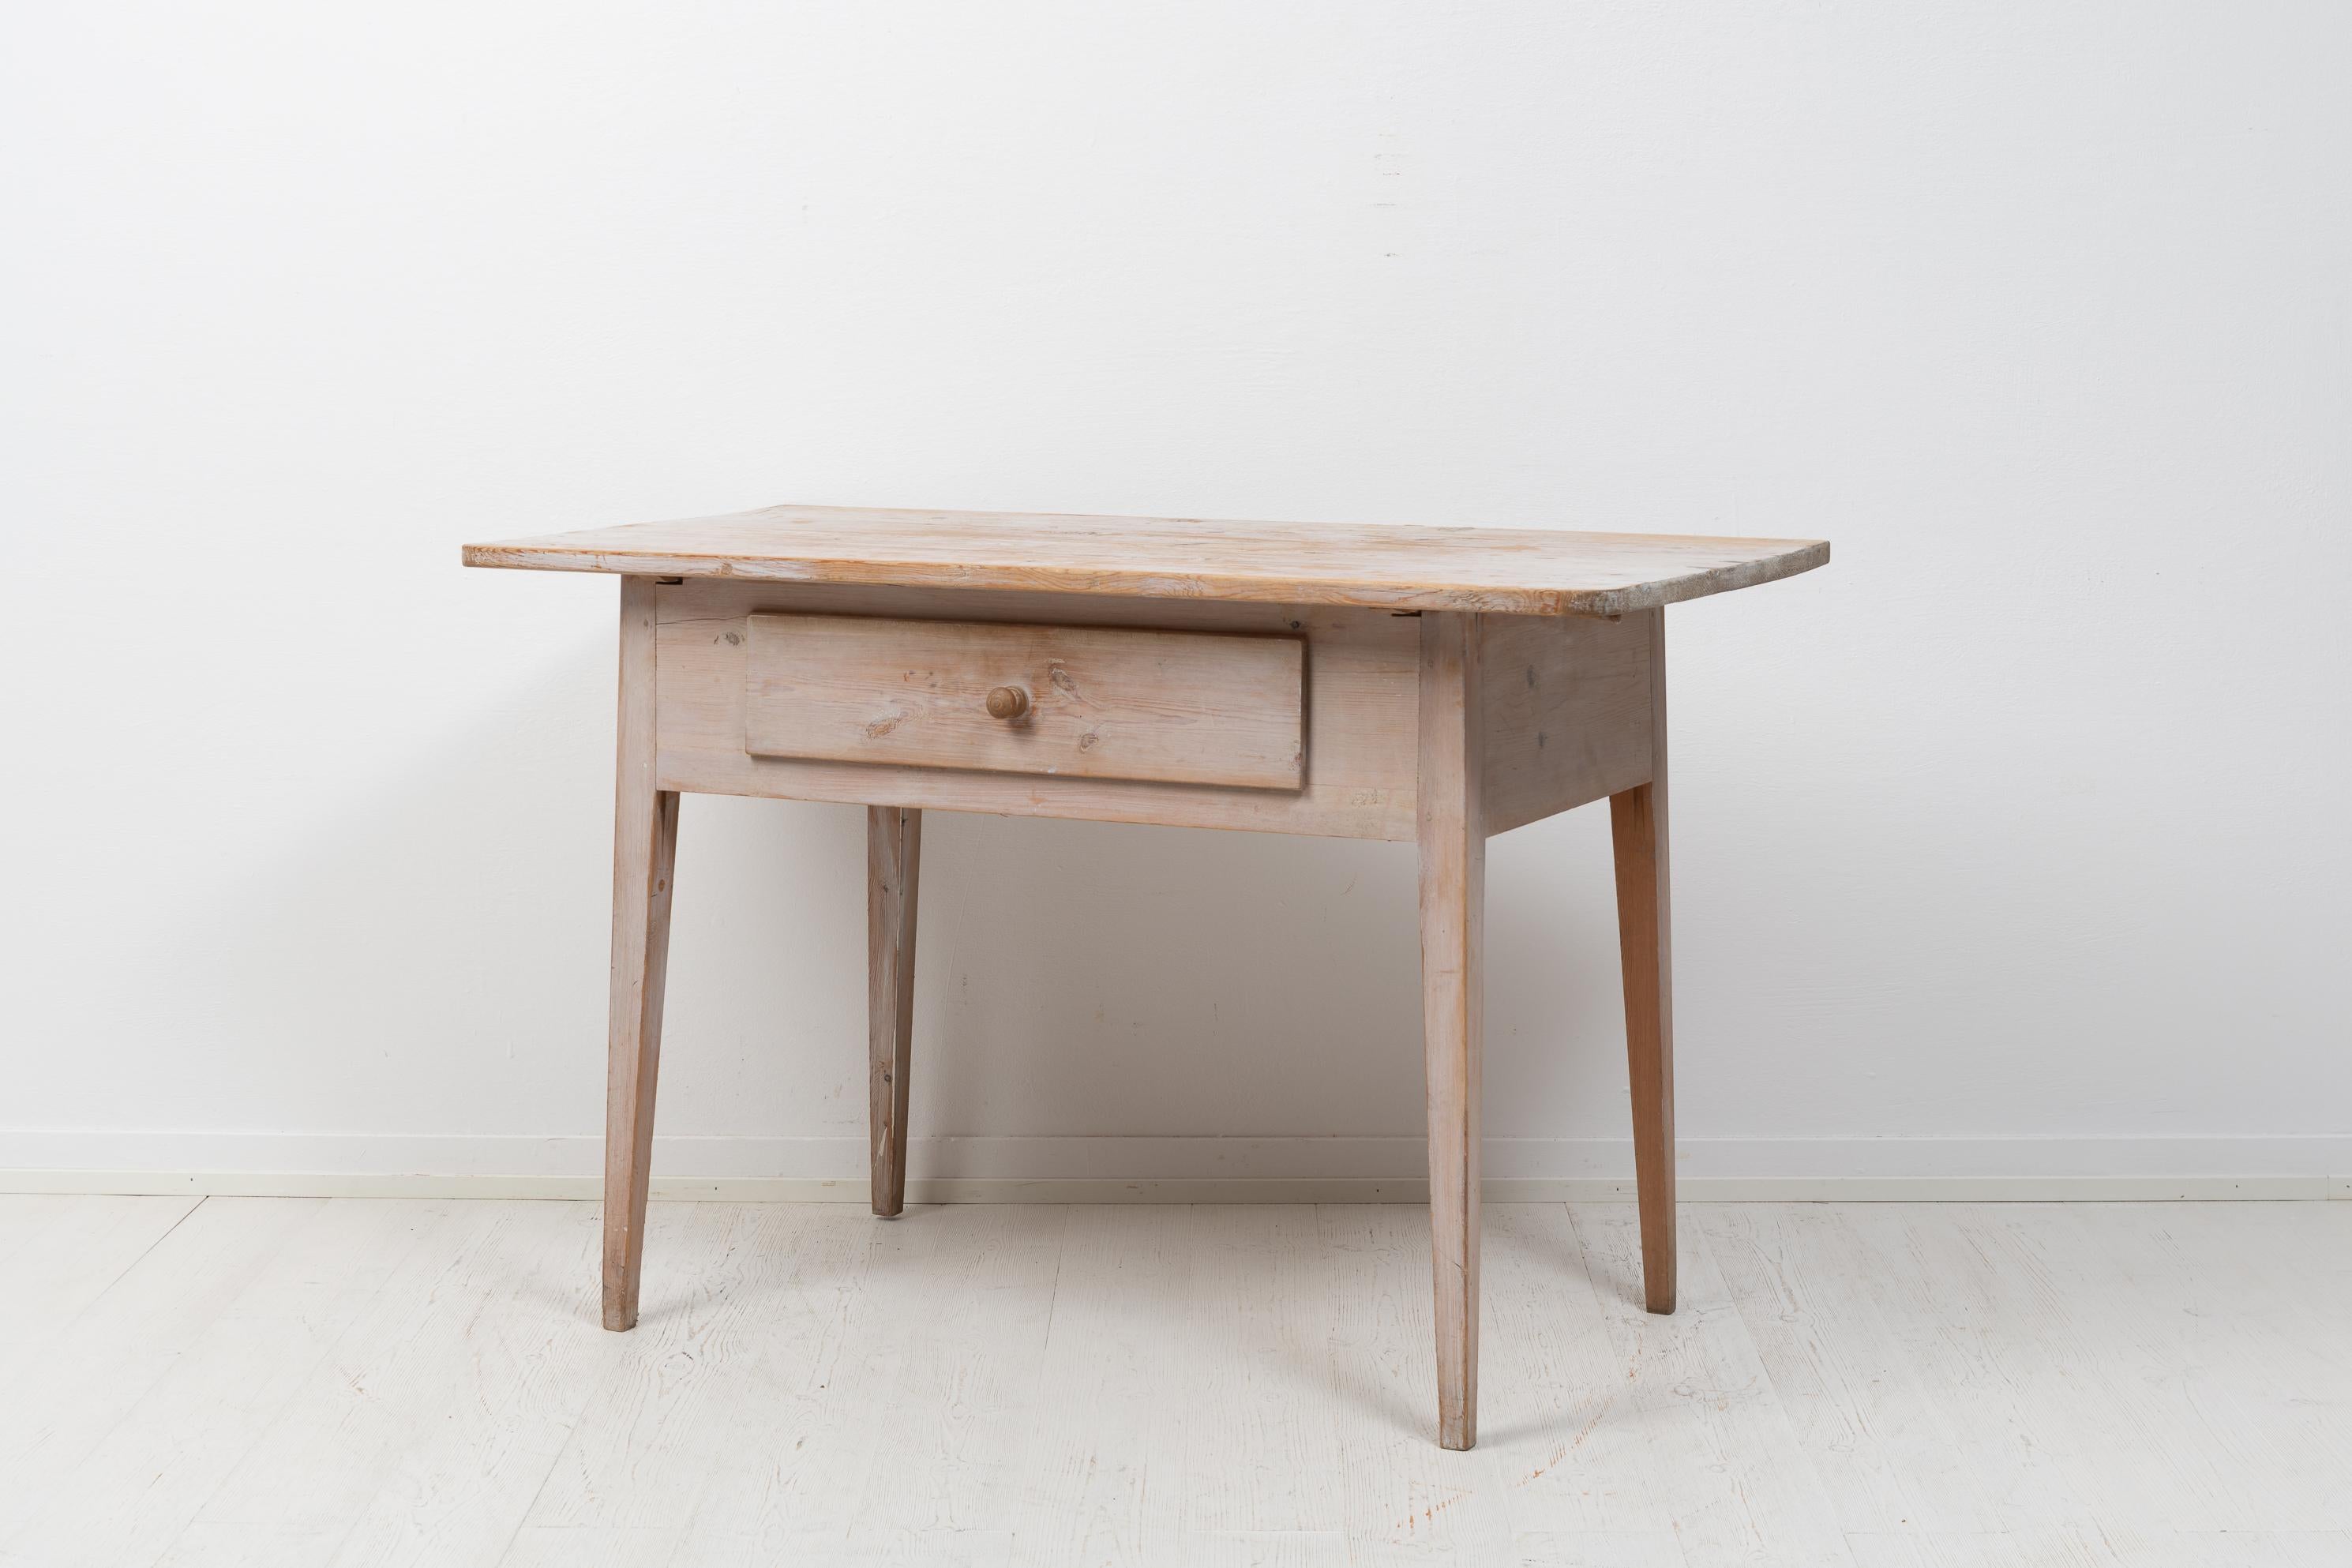 Hand-Crafted Genuine Antique Swedish Handmade Folk Art Pine Rustic Table with Drawer For Sale